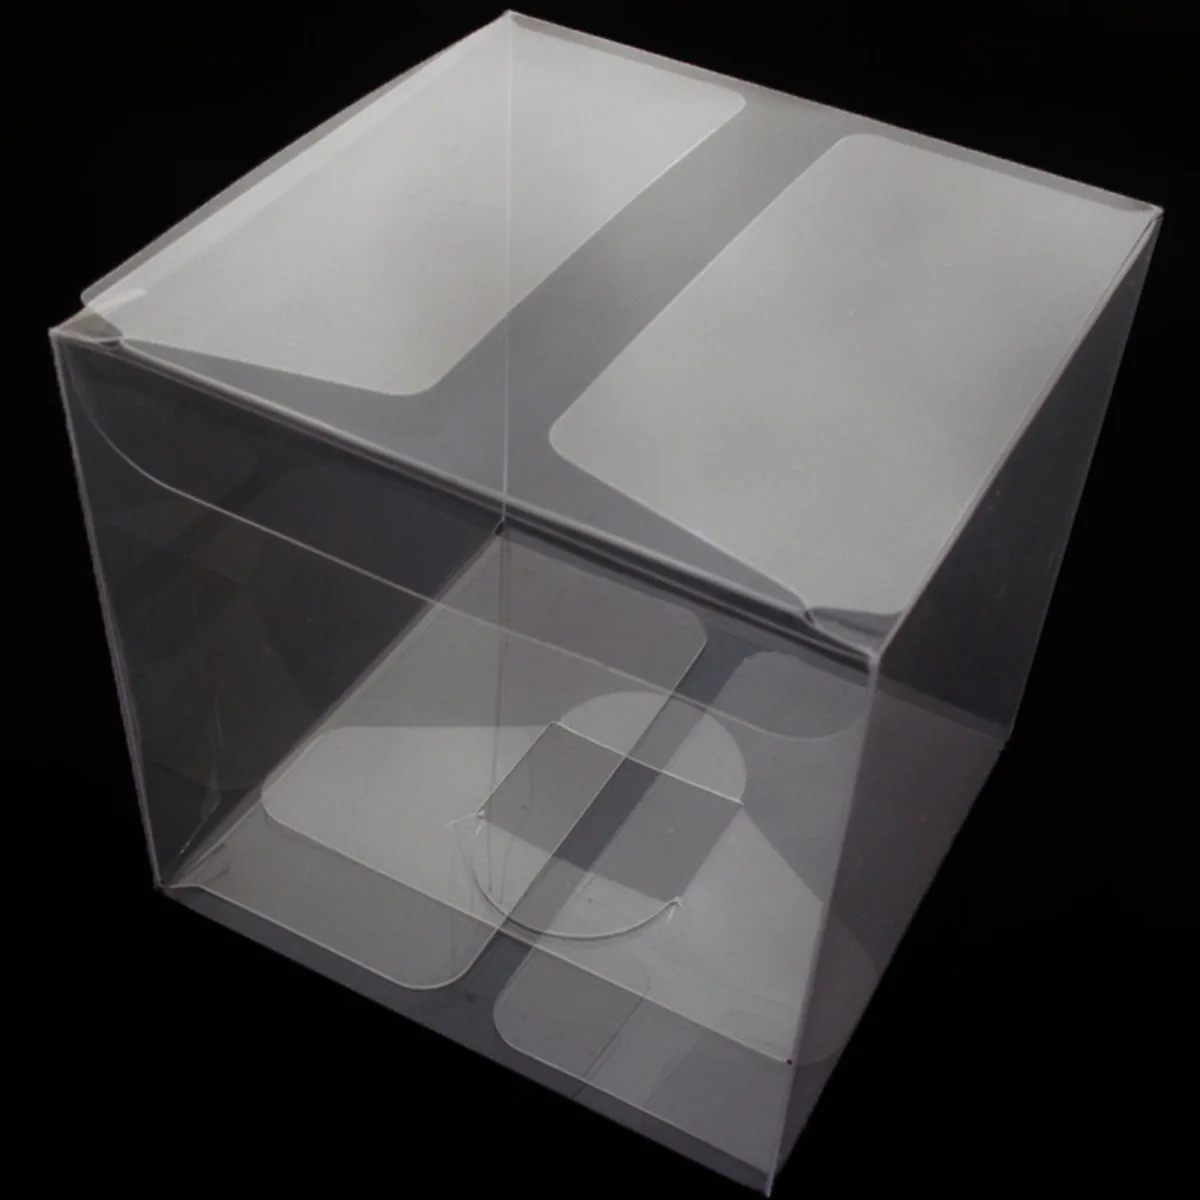 

25pcs 4x4x4cm Clear Plastic PVC Packing Box Transparent Candy Wrapping Boxes Christmas Apple Box Wedding Party Gift Packing Box